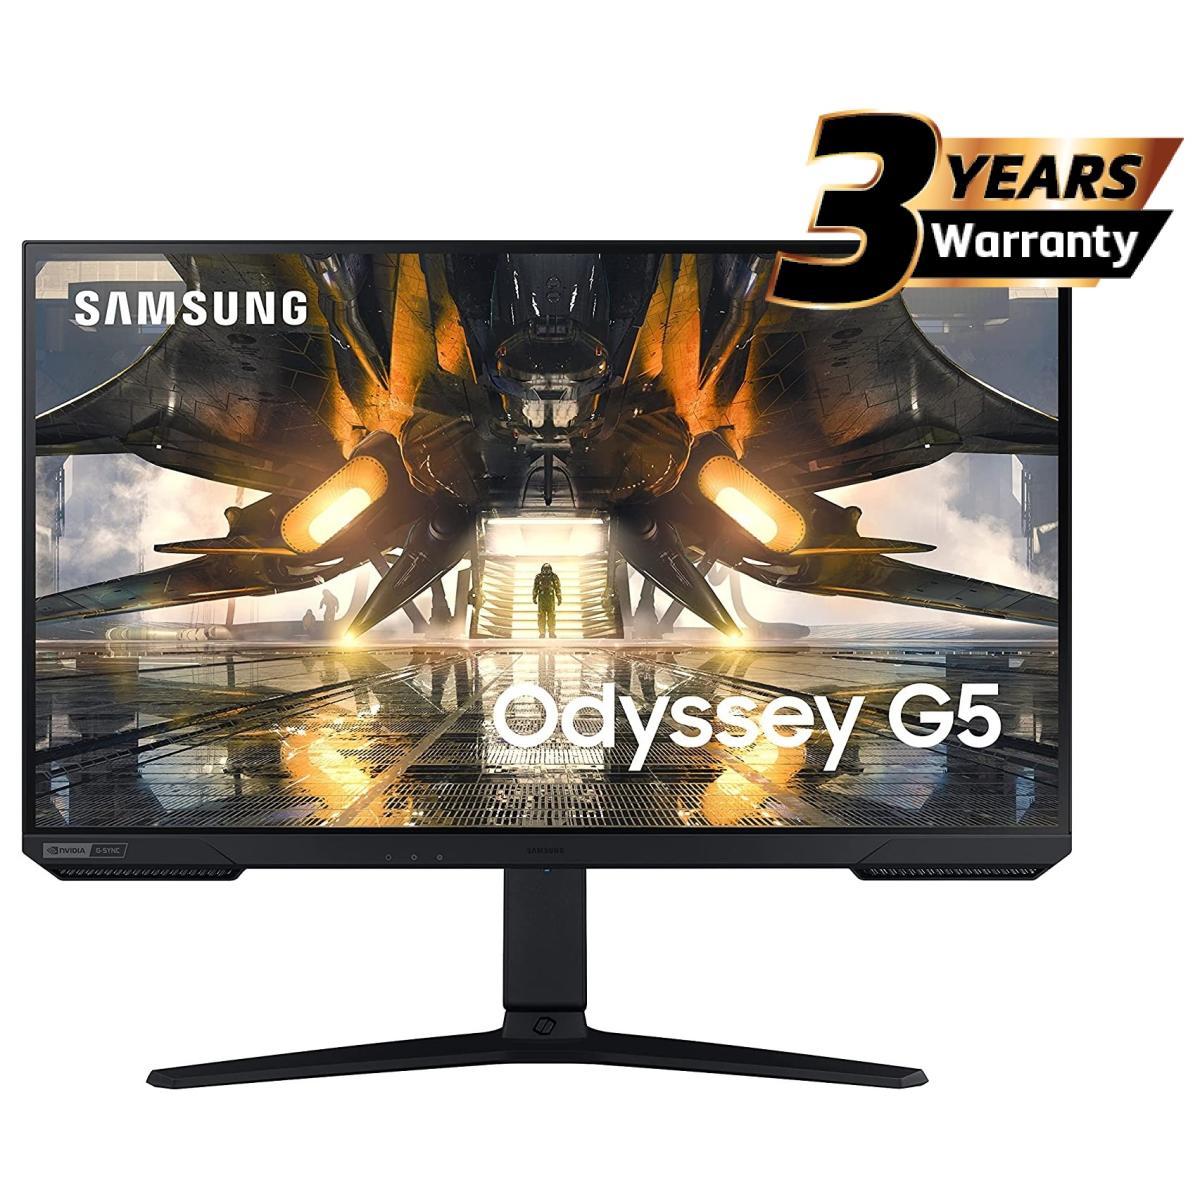 Samsung 32" Gaming Monitor with IPS panel, 165hz refresh rate and 1ms response time